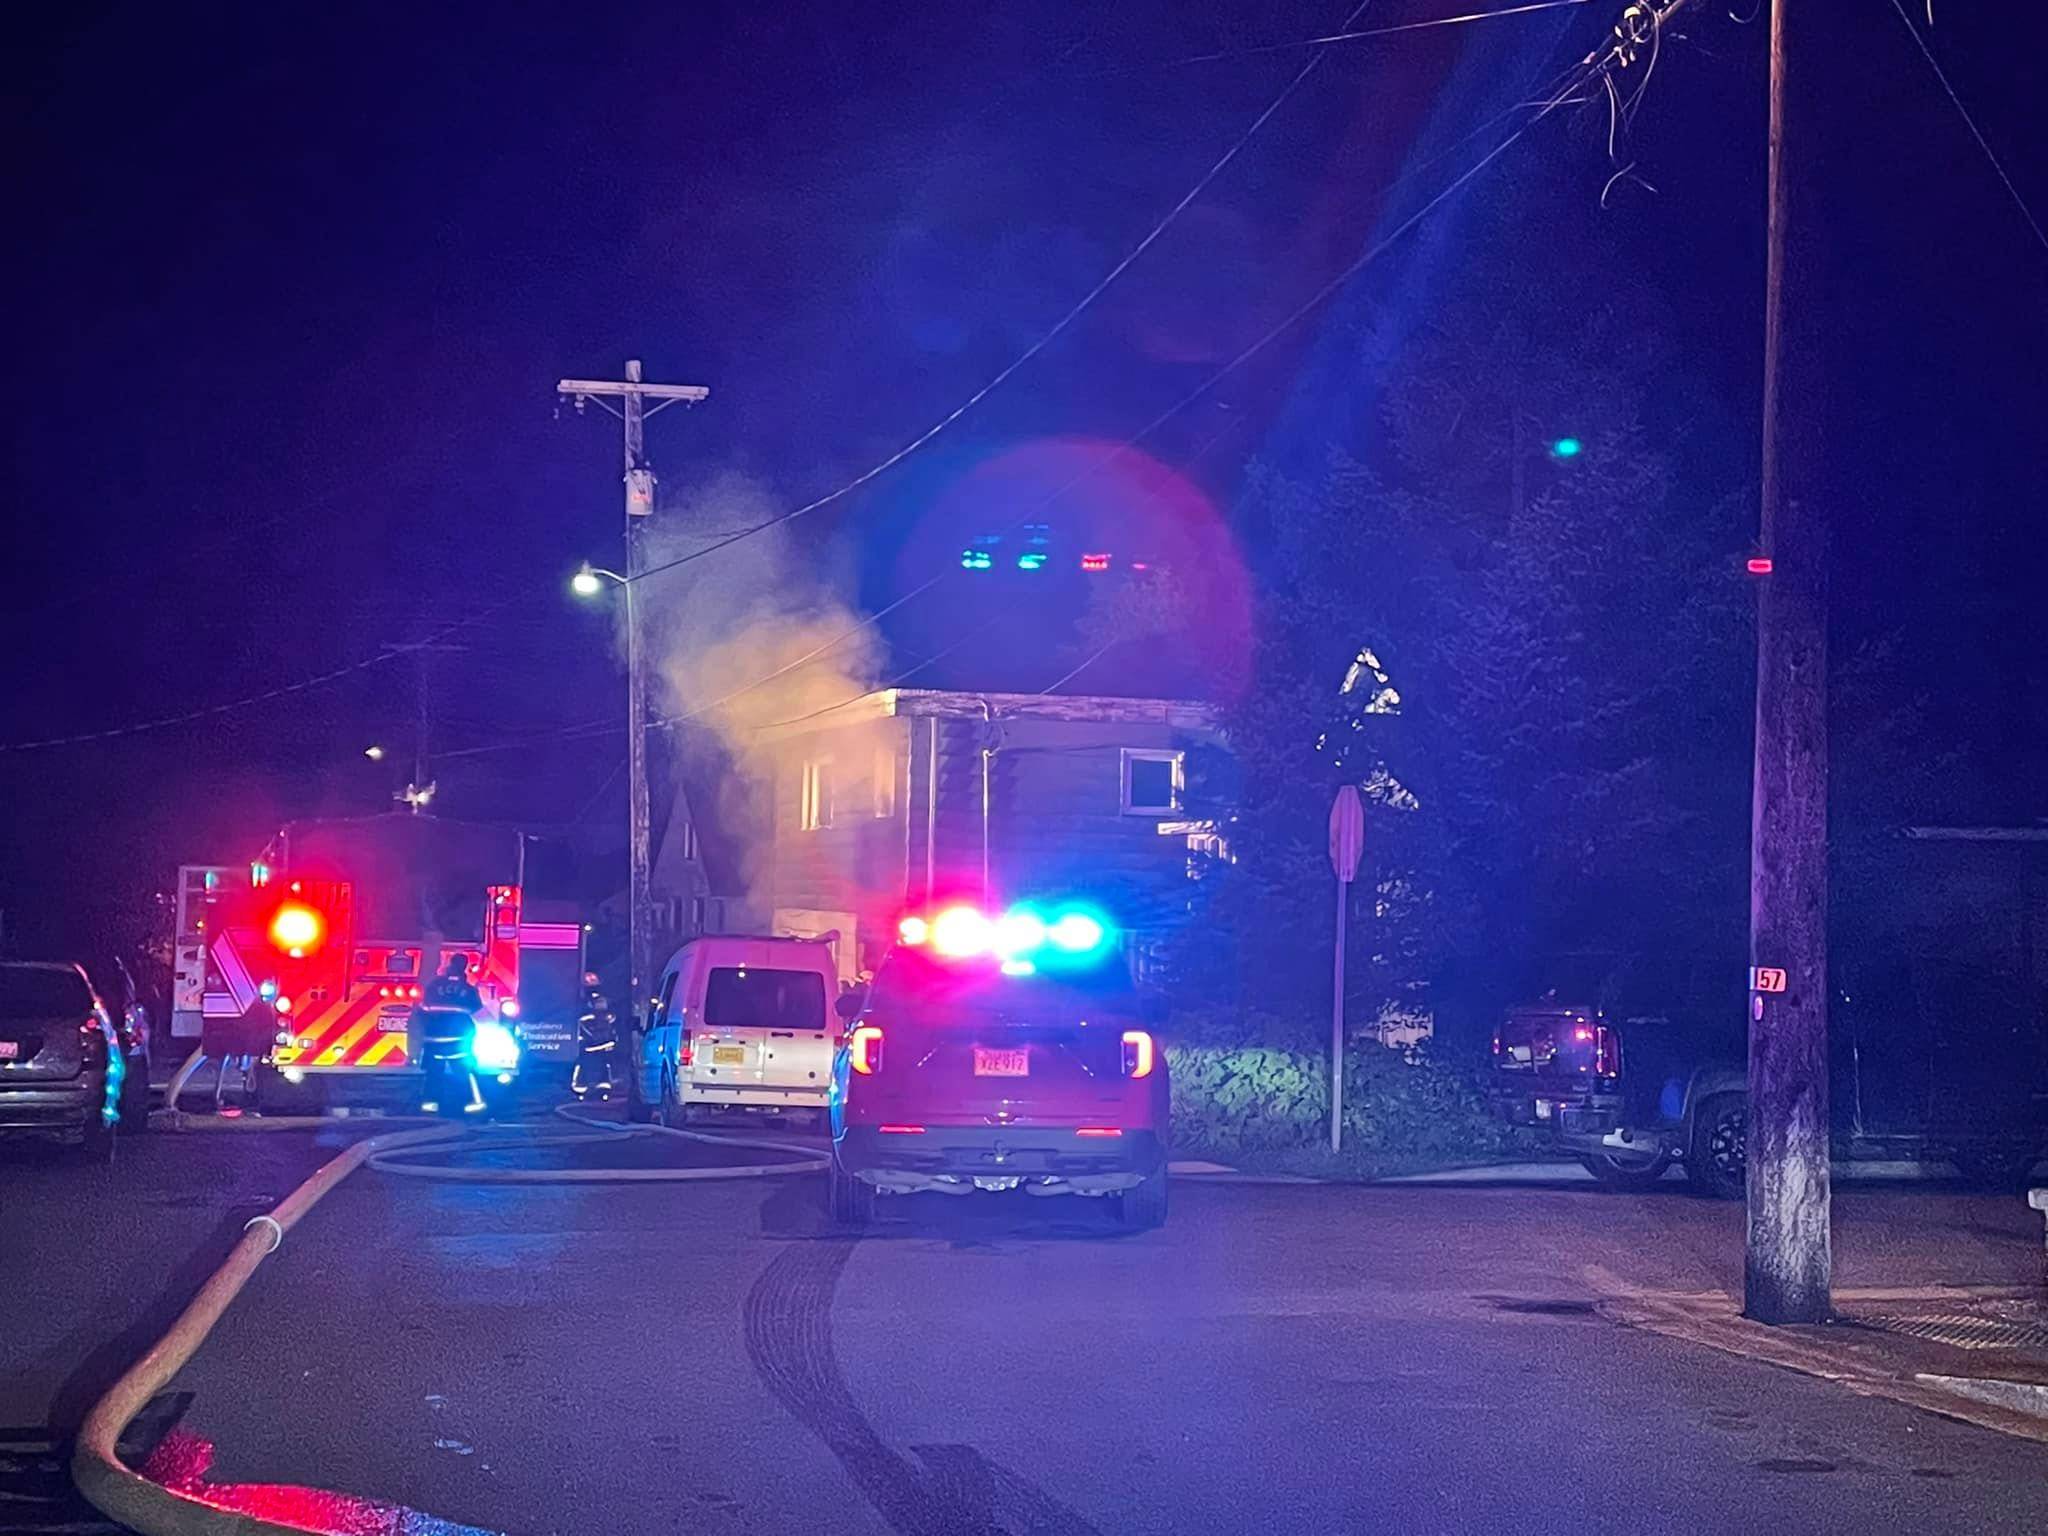 Capital City Fire/Rescue responded to multiple fires Thursday morning, including this one on West 10th Street, reported at 3:16 a.m. (Courtesy photo / CCFR)